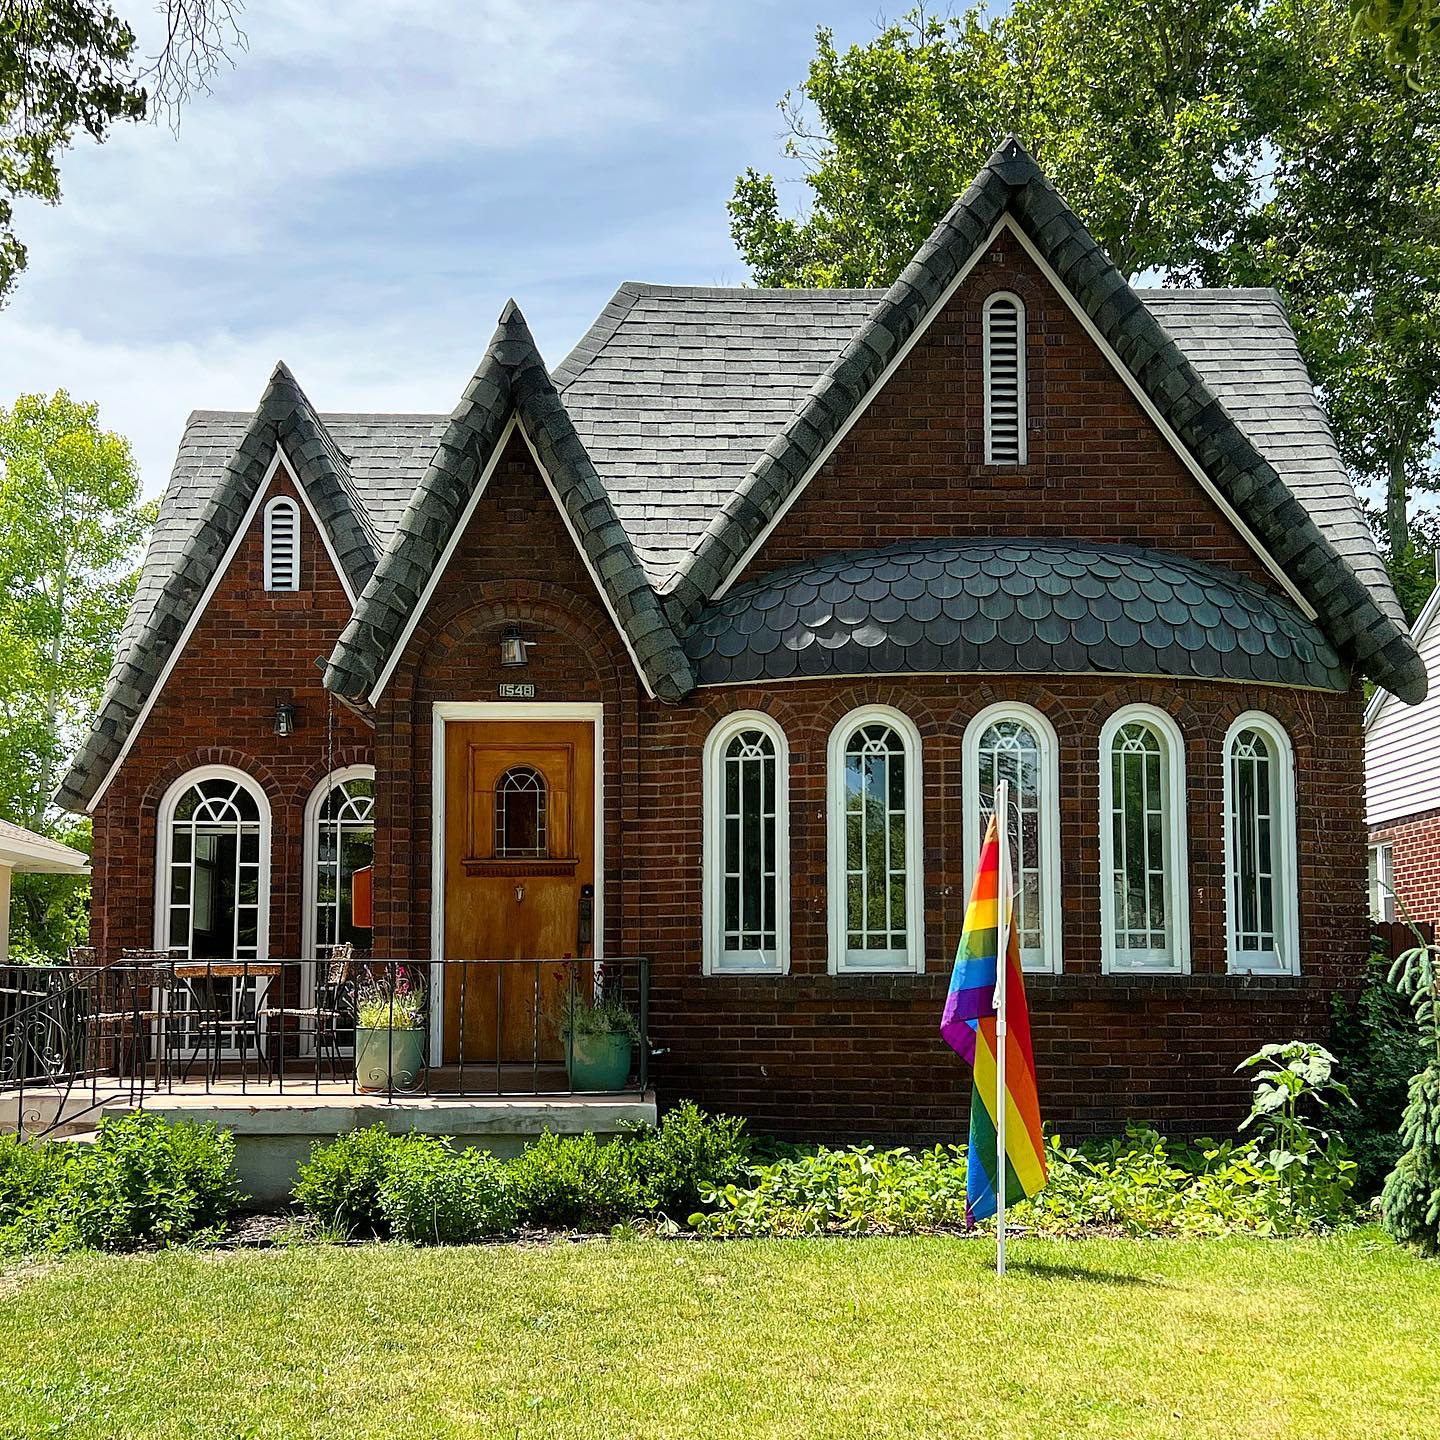 A dark red brick cottage with black shingles, white accents on windows and doors, and a LGBT pride flag in the front yard. Photo via Instagram user @lovelyoldhomes